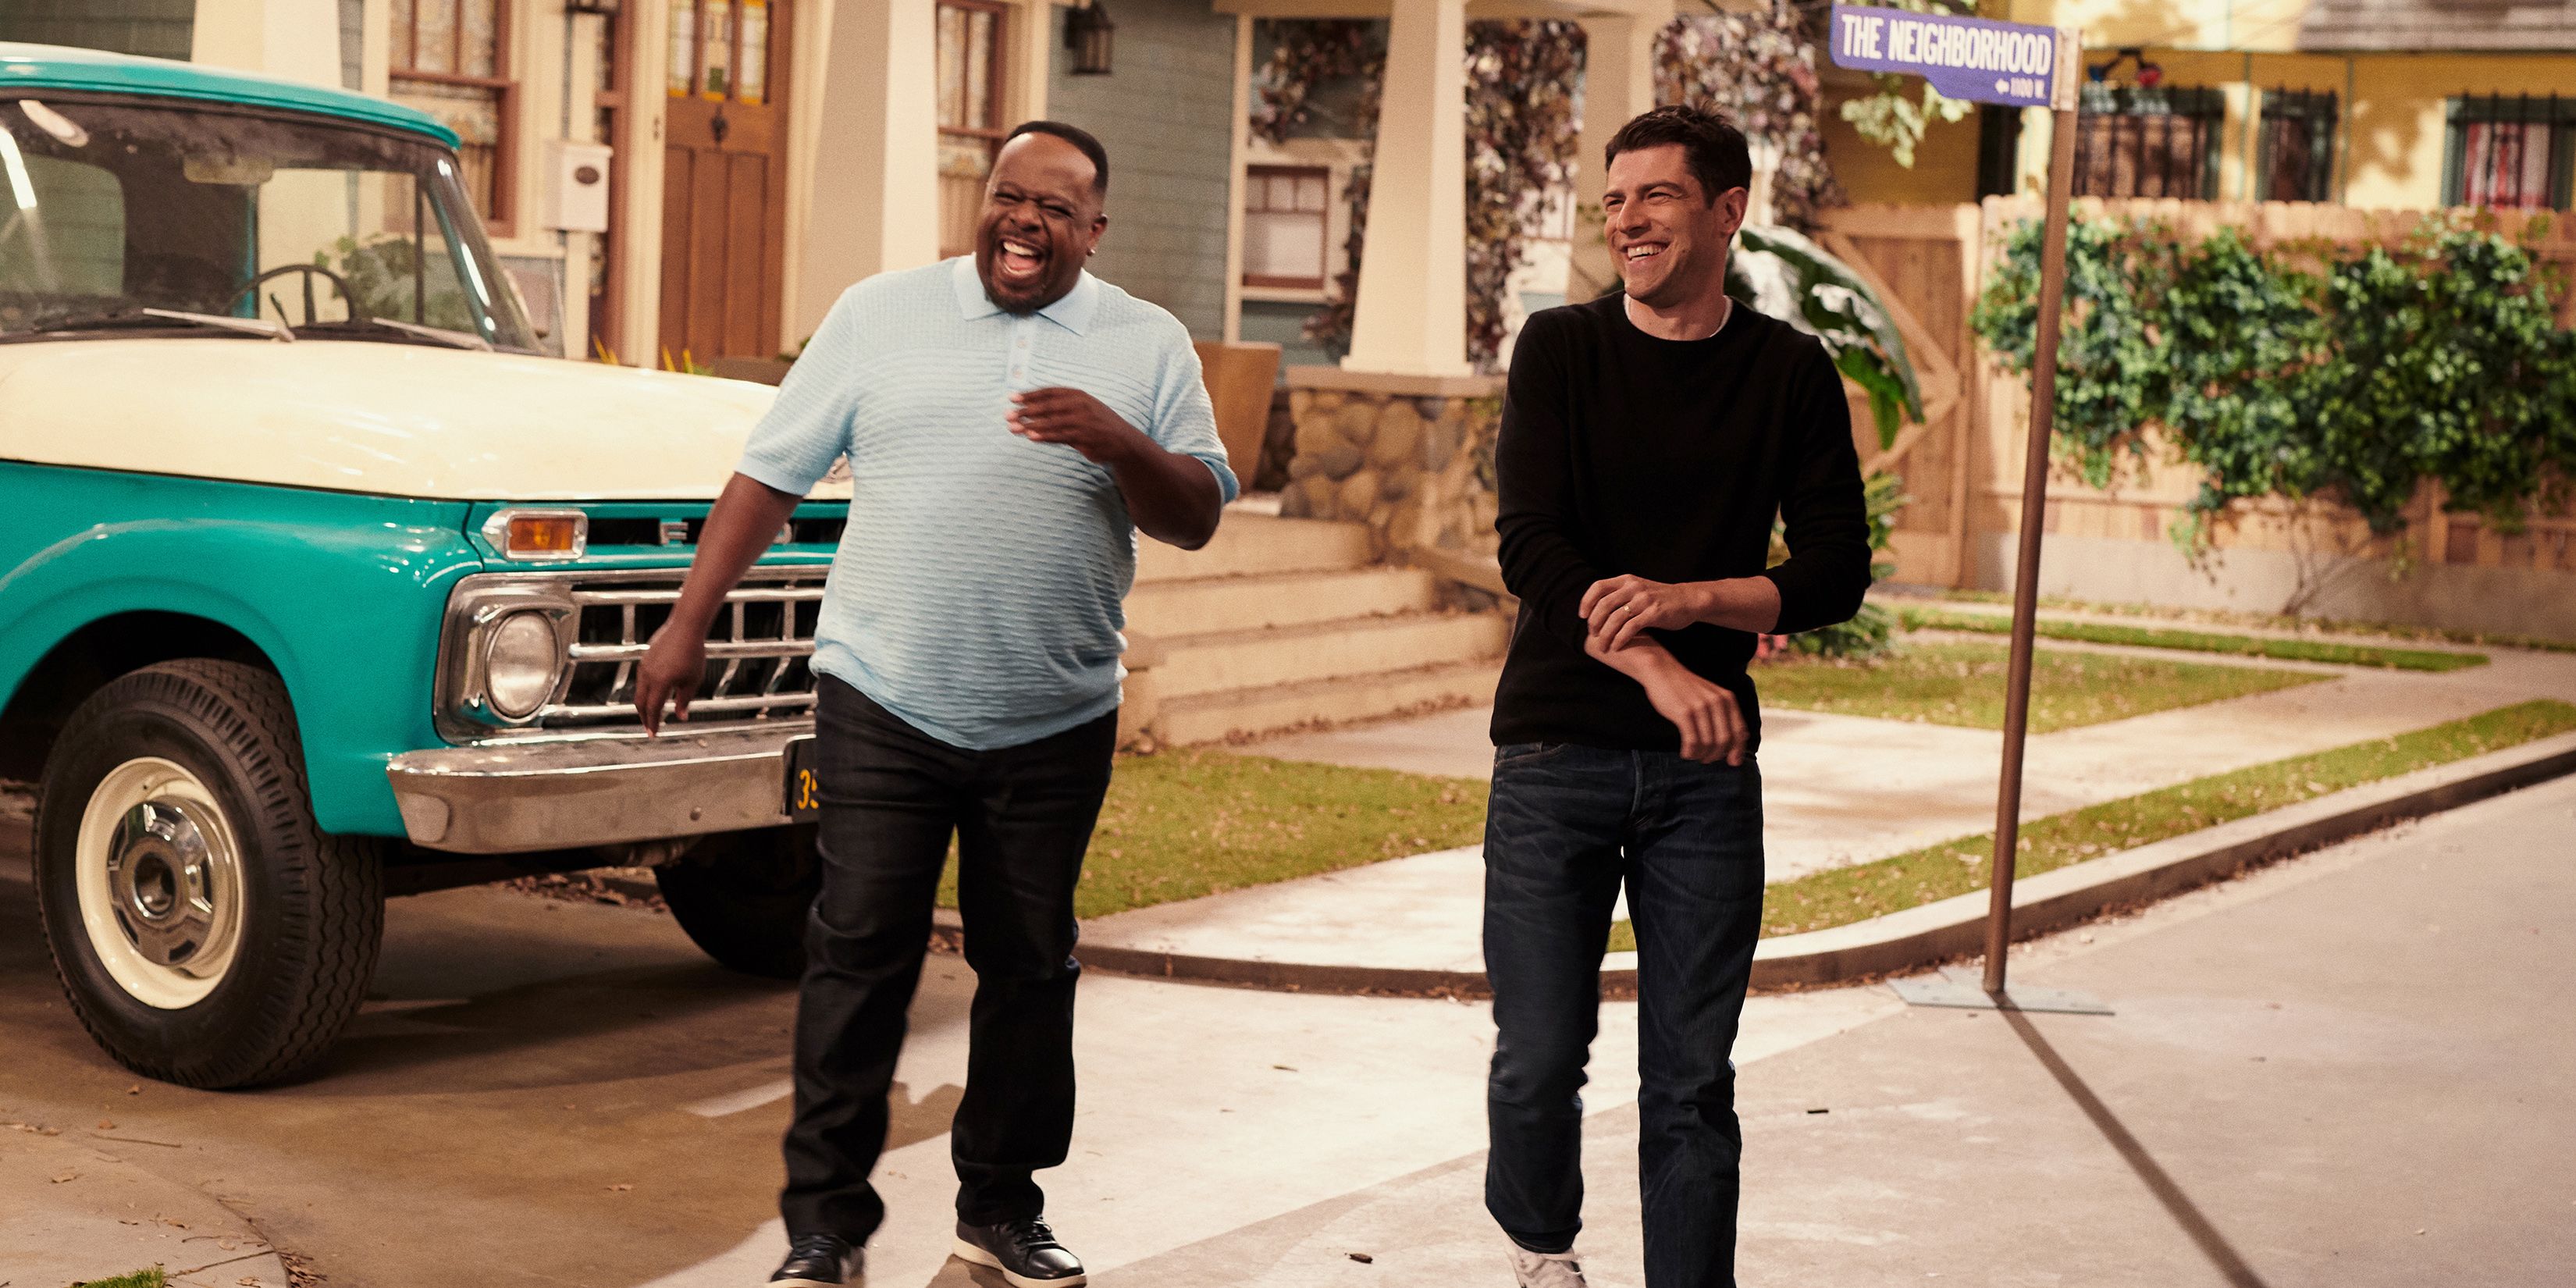 Cedric the Entertainer and Max Greenfield walking on the street